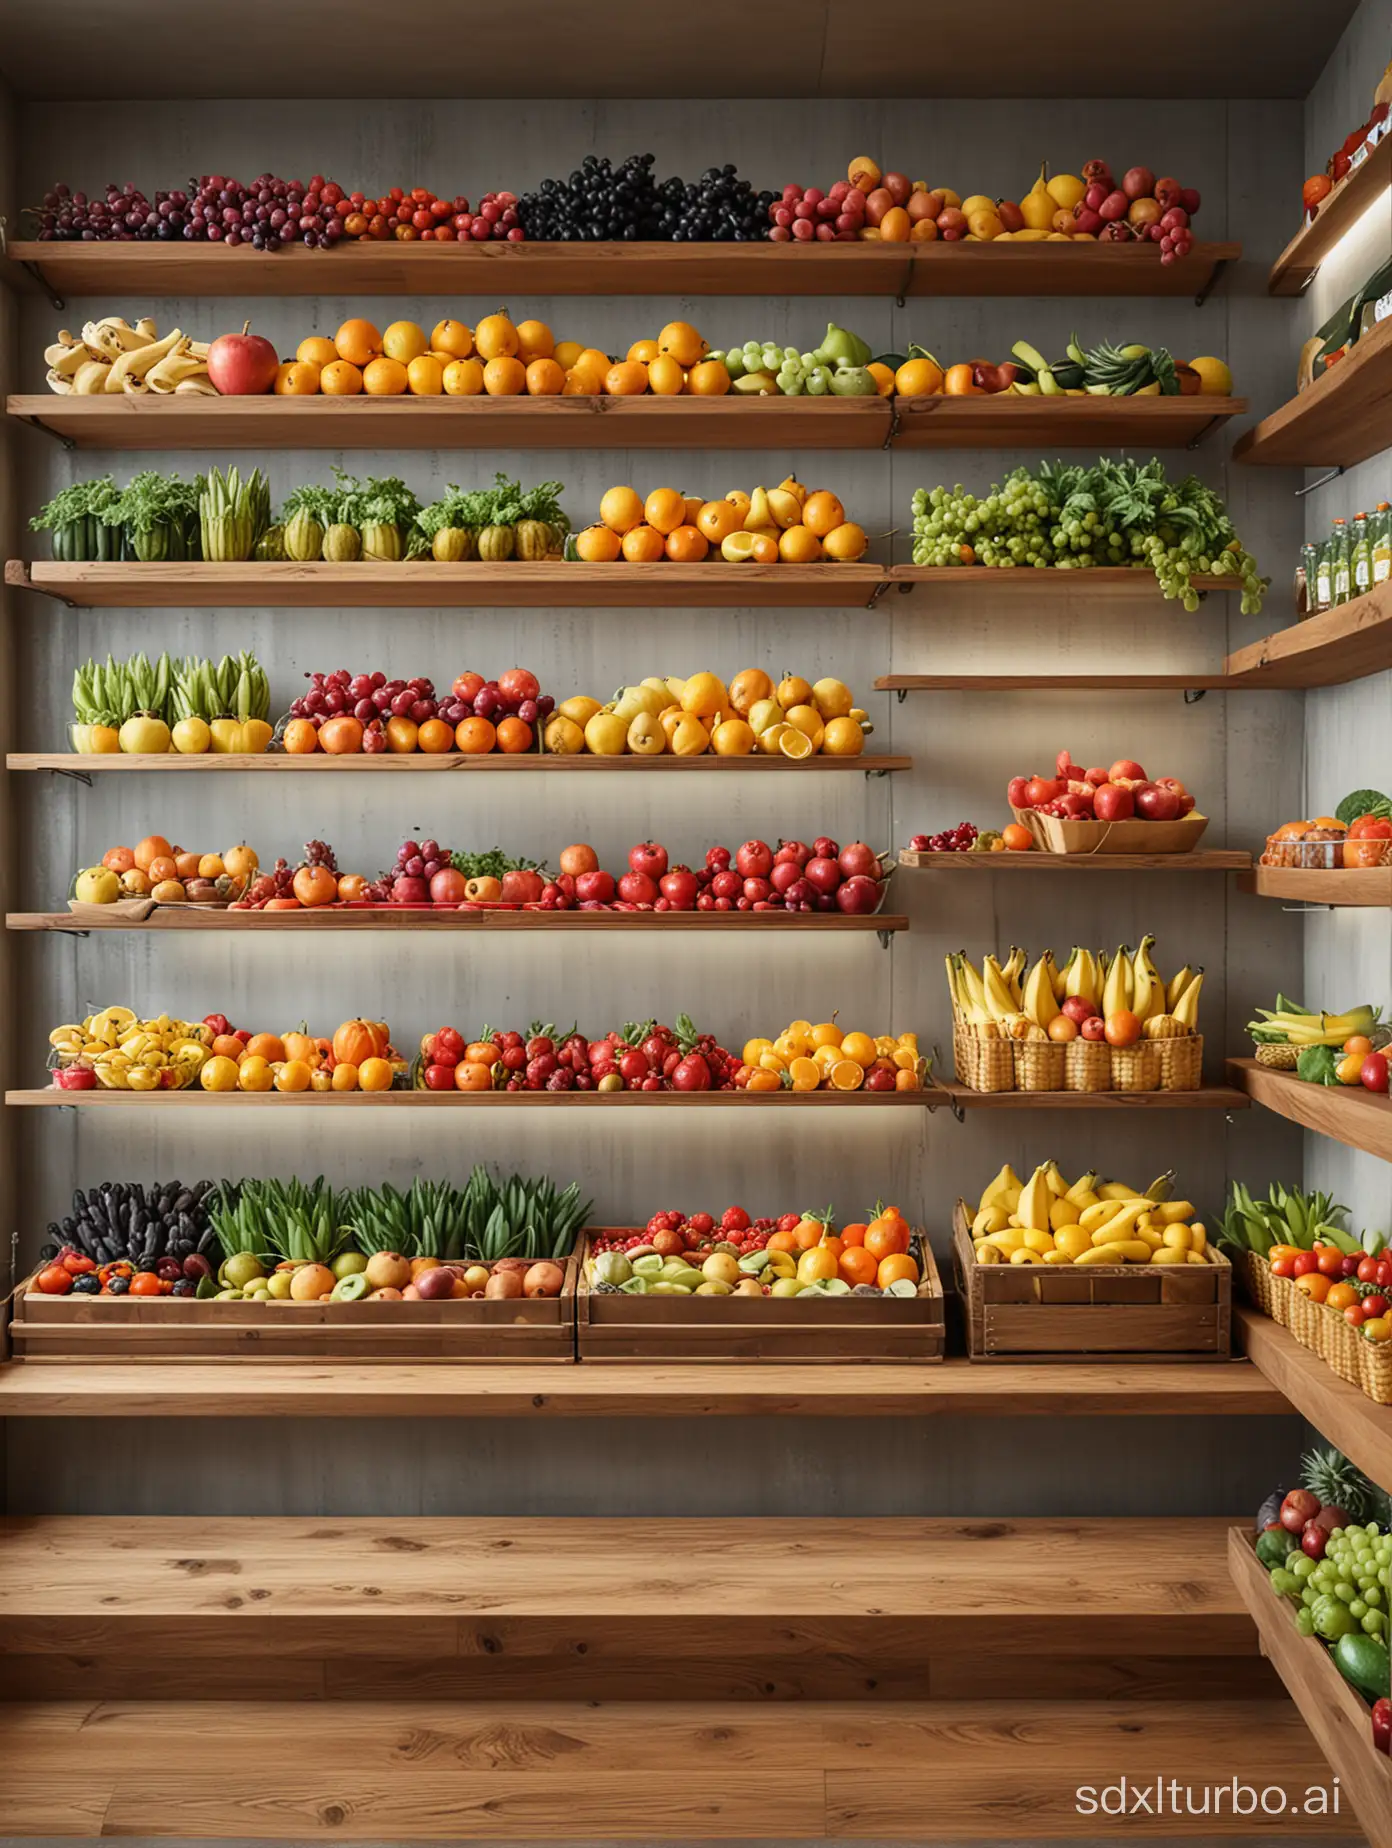 One wall is full of shelves, filled with all kinds of fruits, fresh and enticing. Realistic feeling.